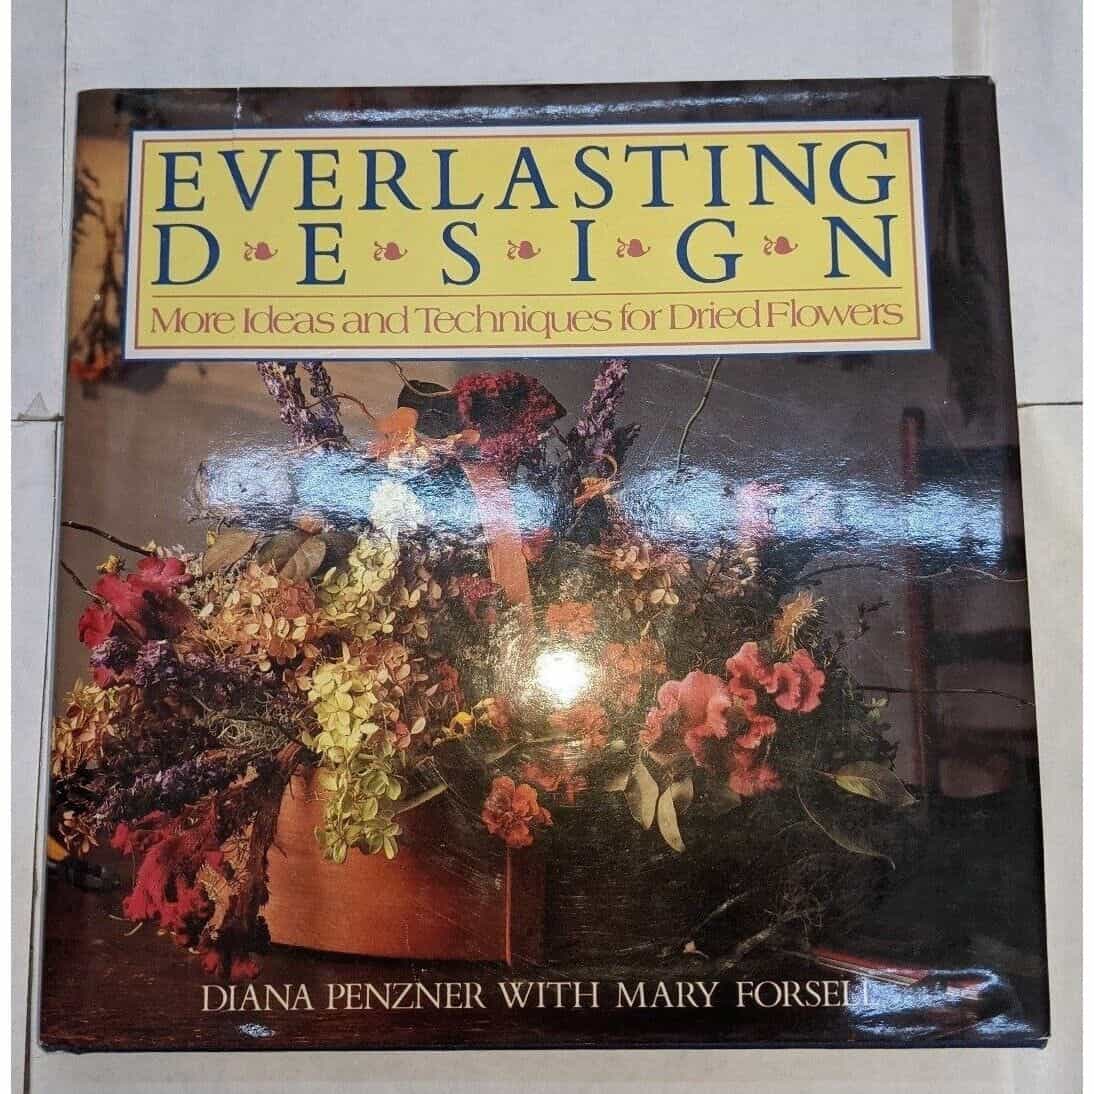 Everlasting Design More Ideas & Techniques For Dried Flowers by Diana Penzner